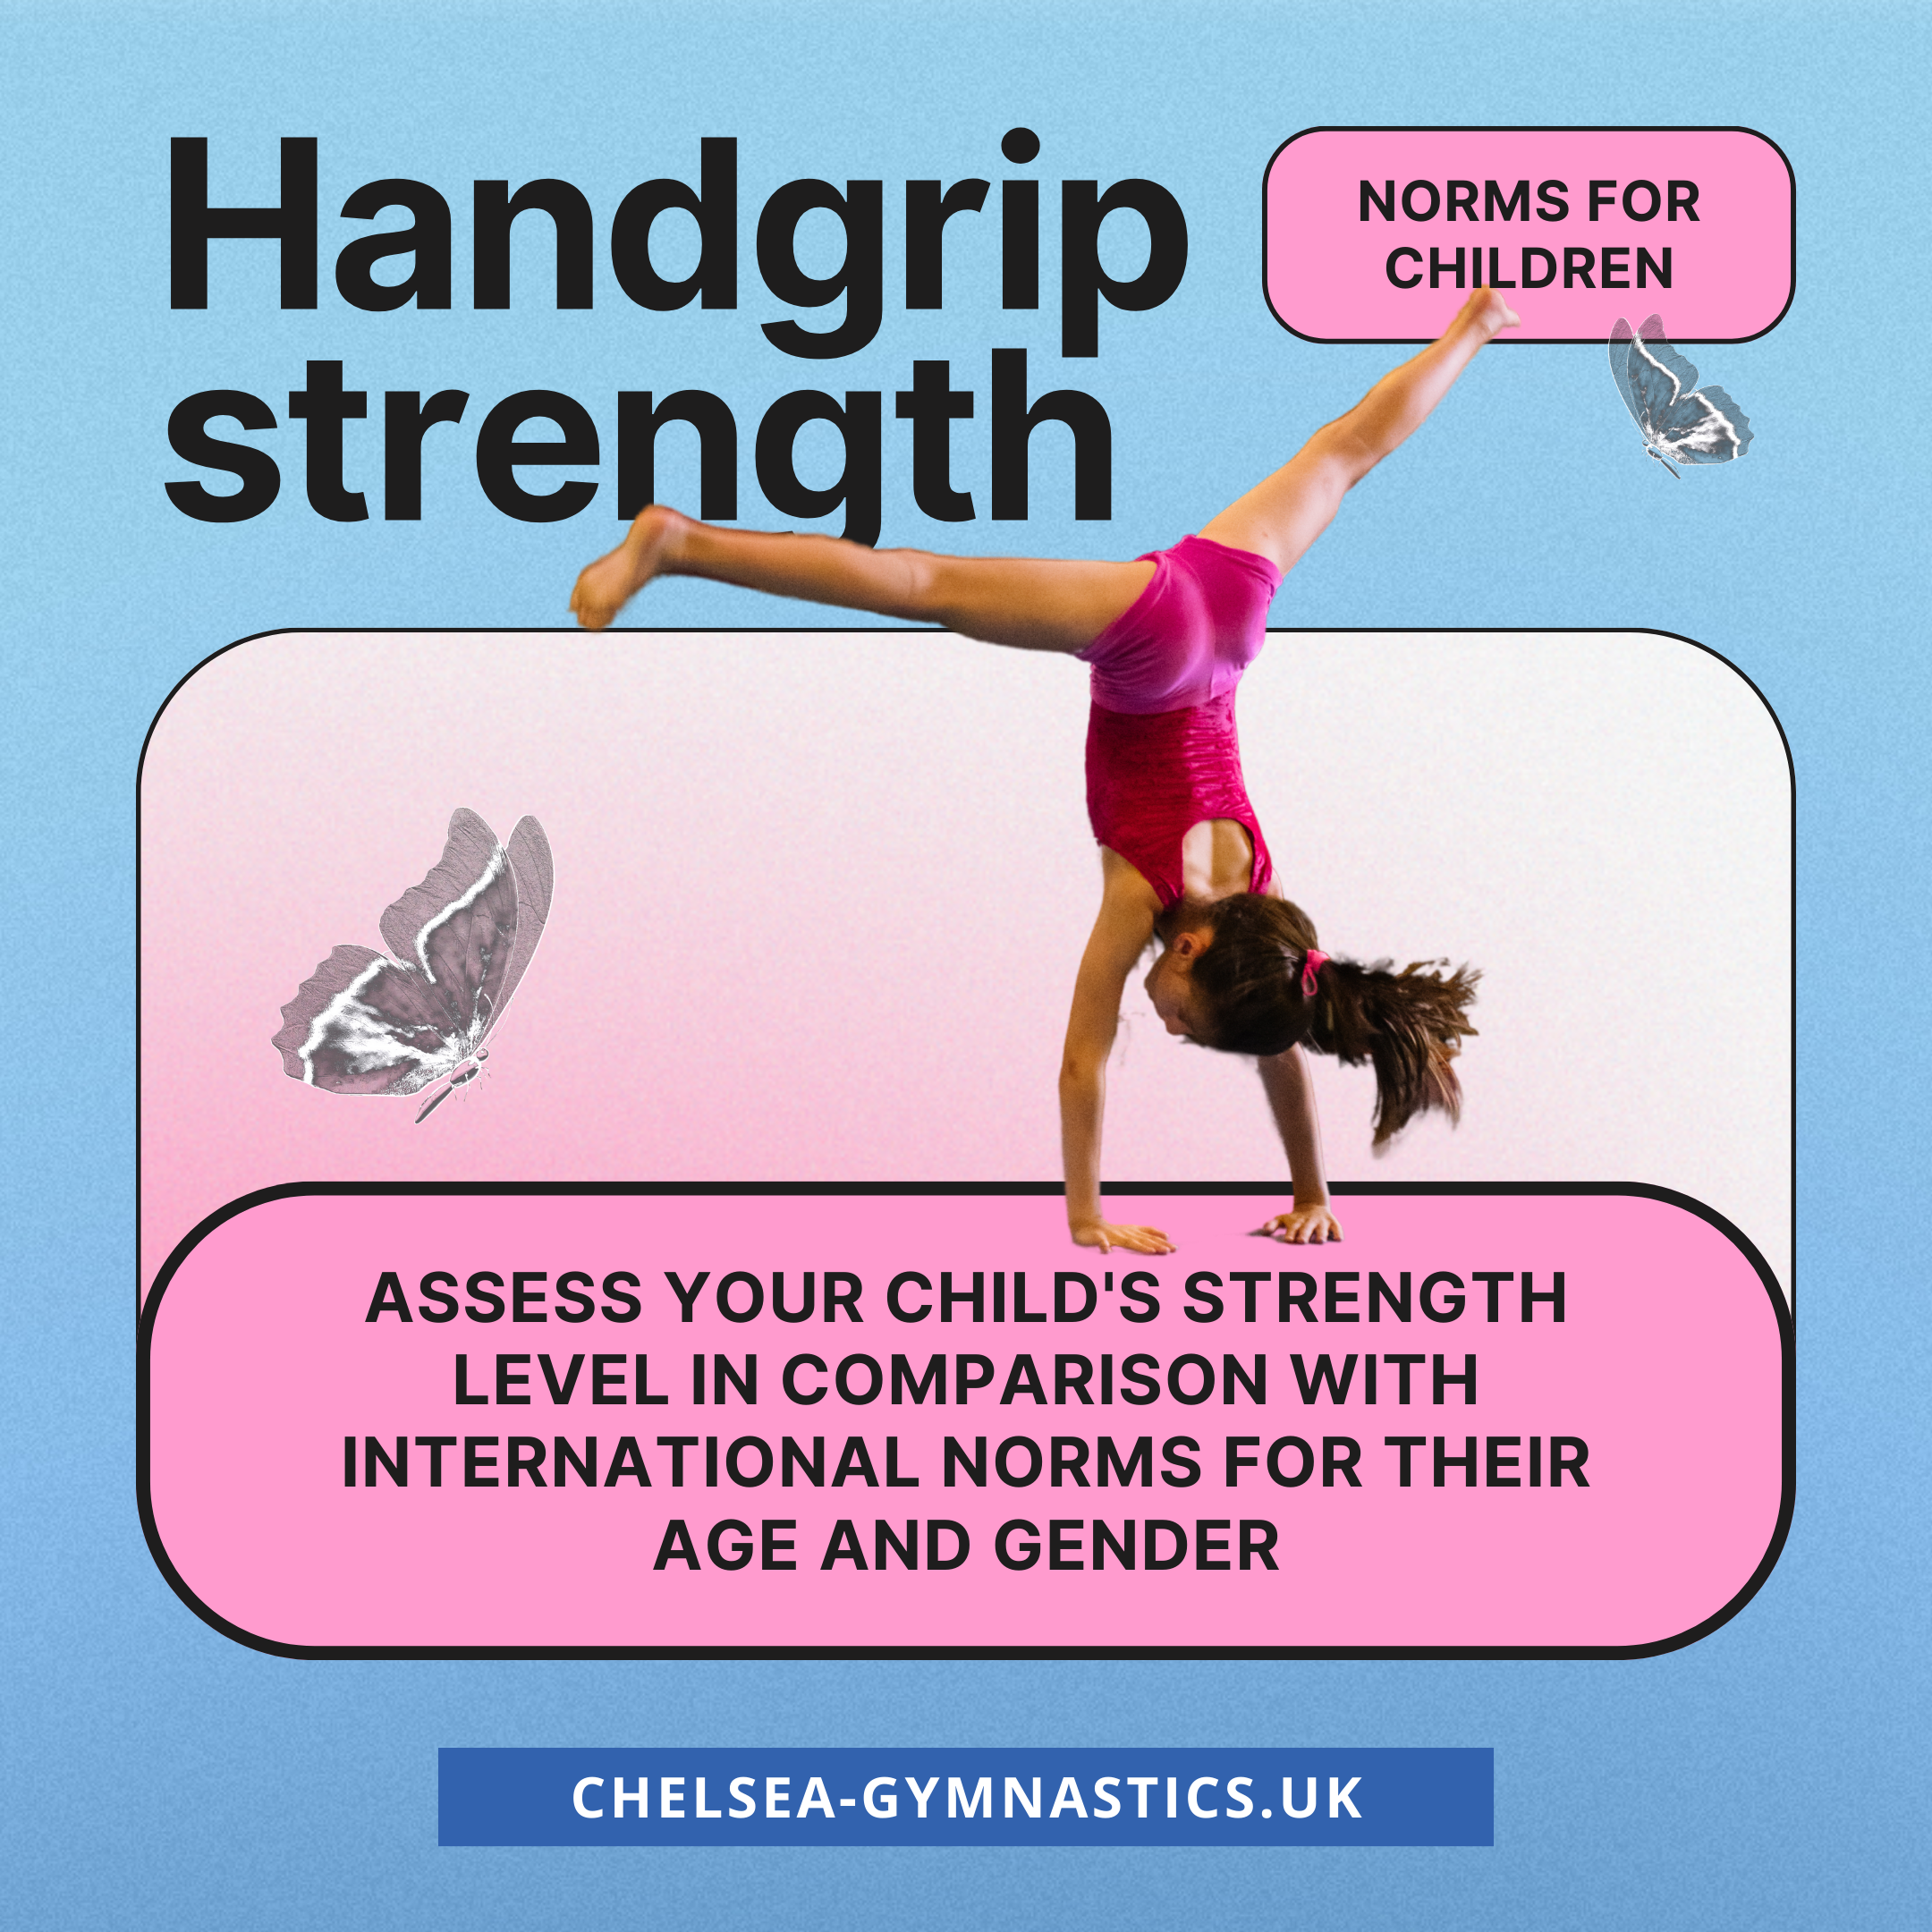 Norms for the Handgrip Strength Test